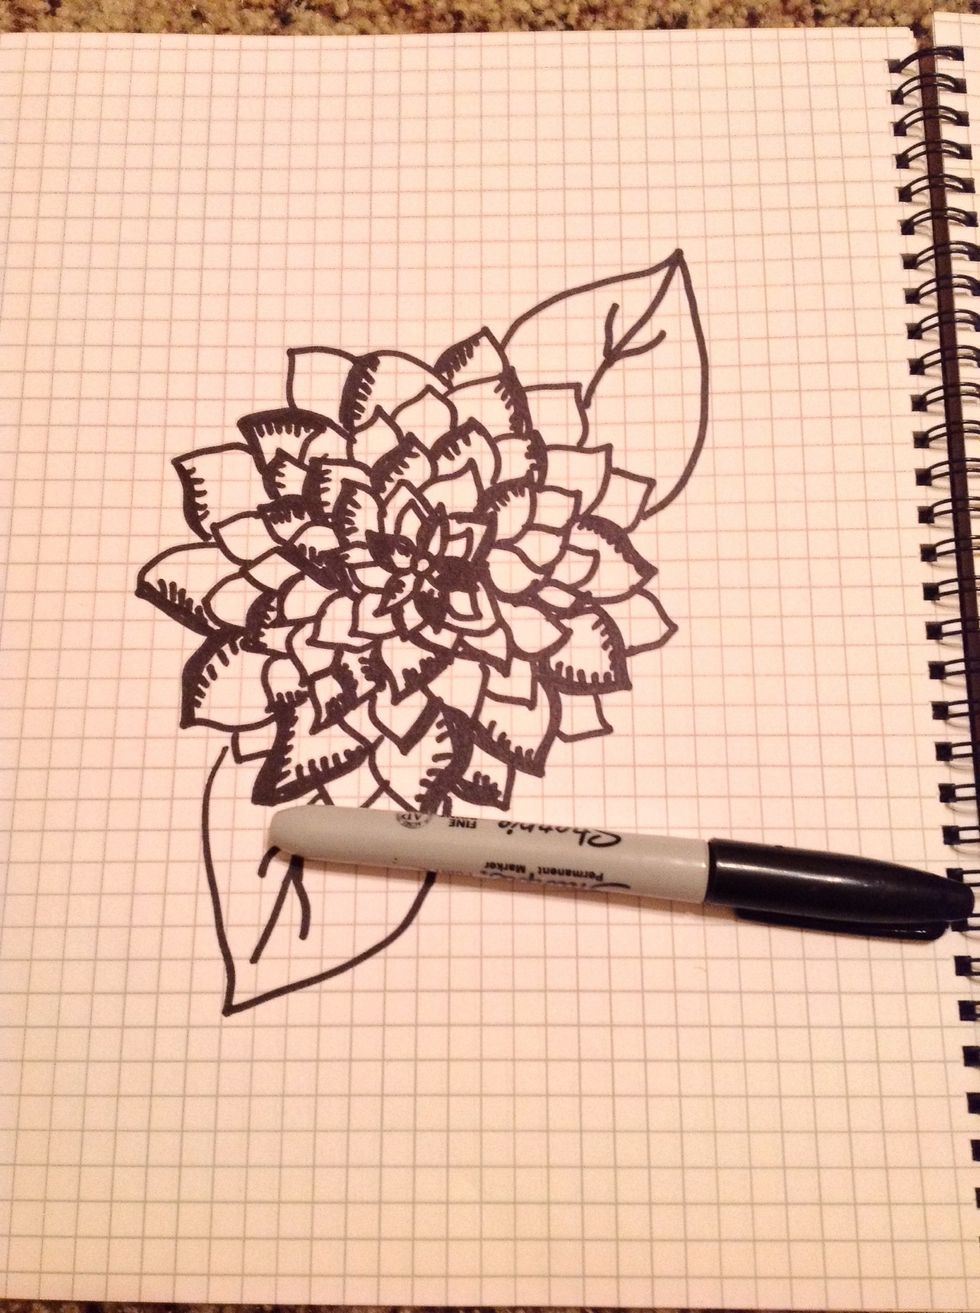 How to draw a flower in pen (sharpie) B+C Guides